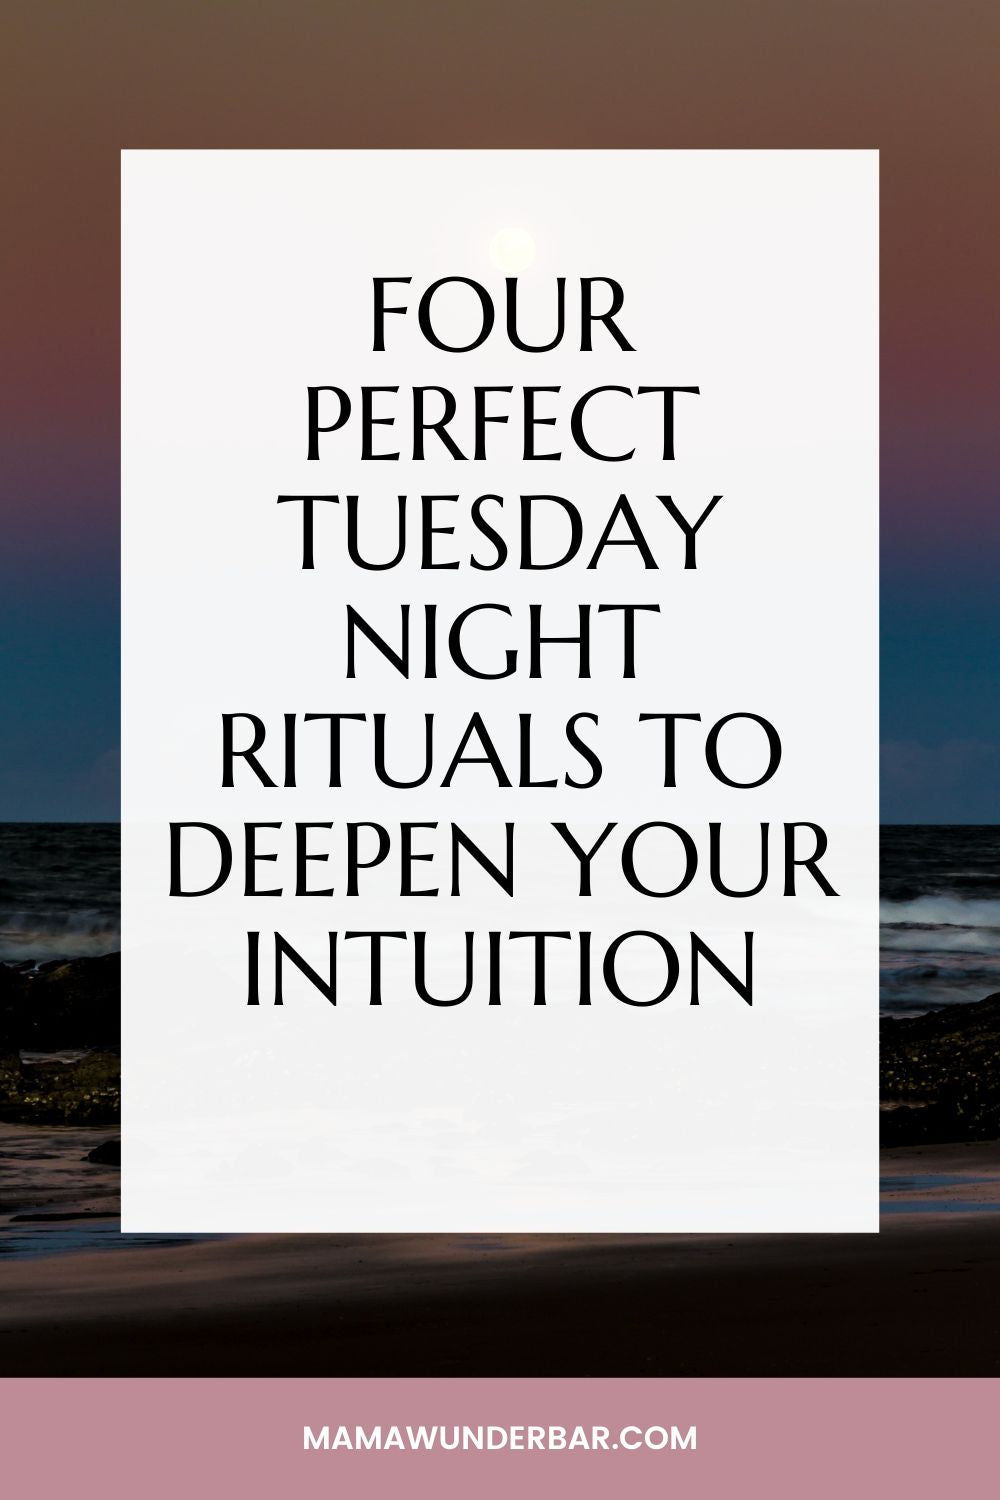 Four Perfect Tuesday Night Rituals to Deepen Your Intuition